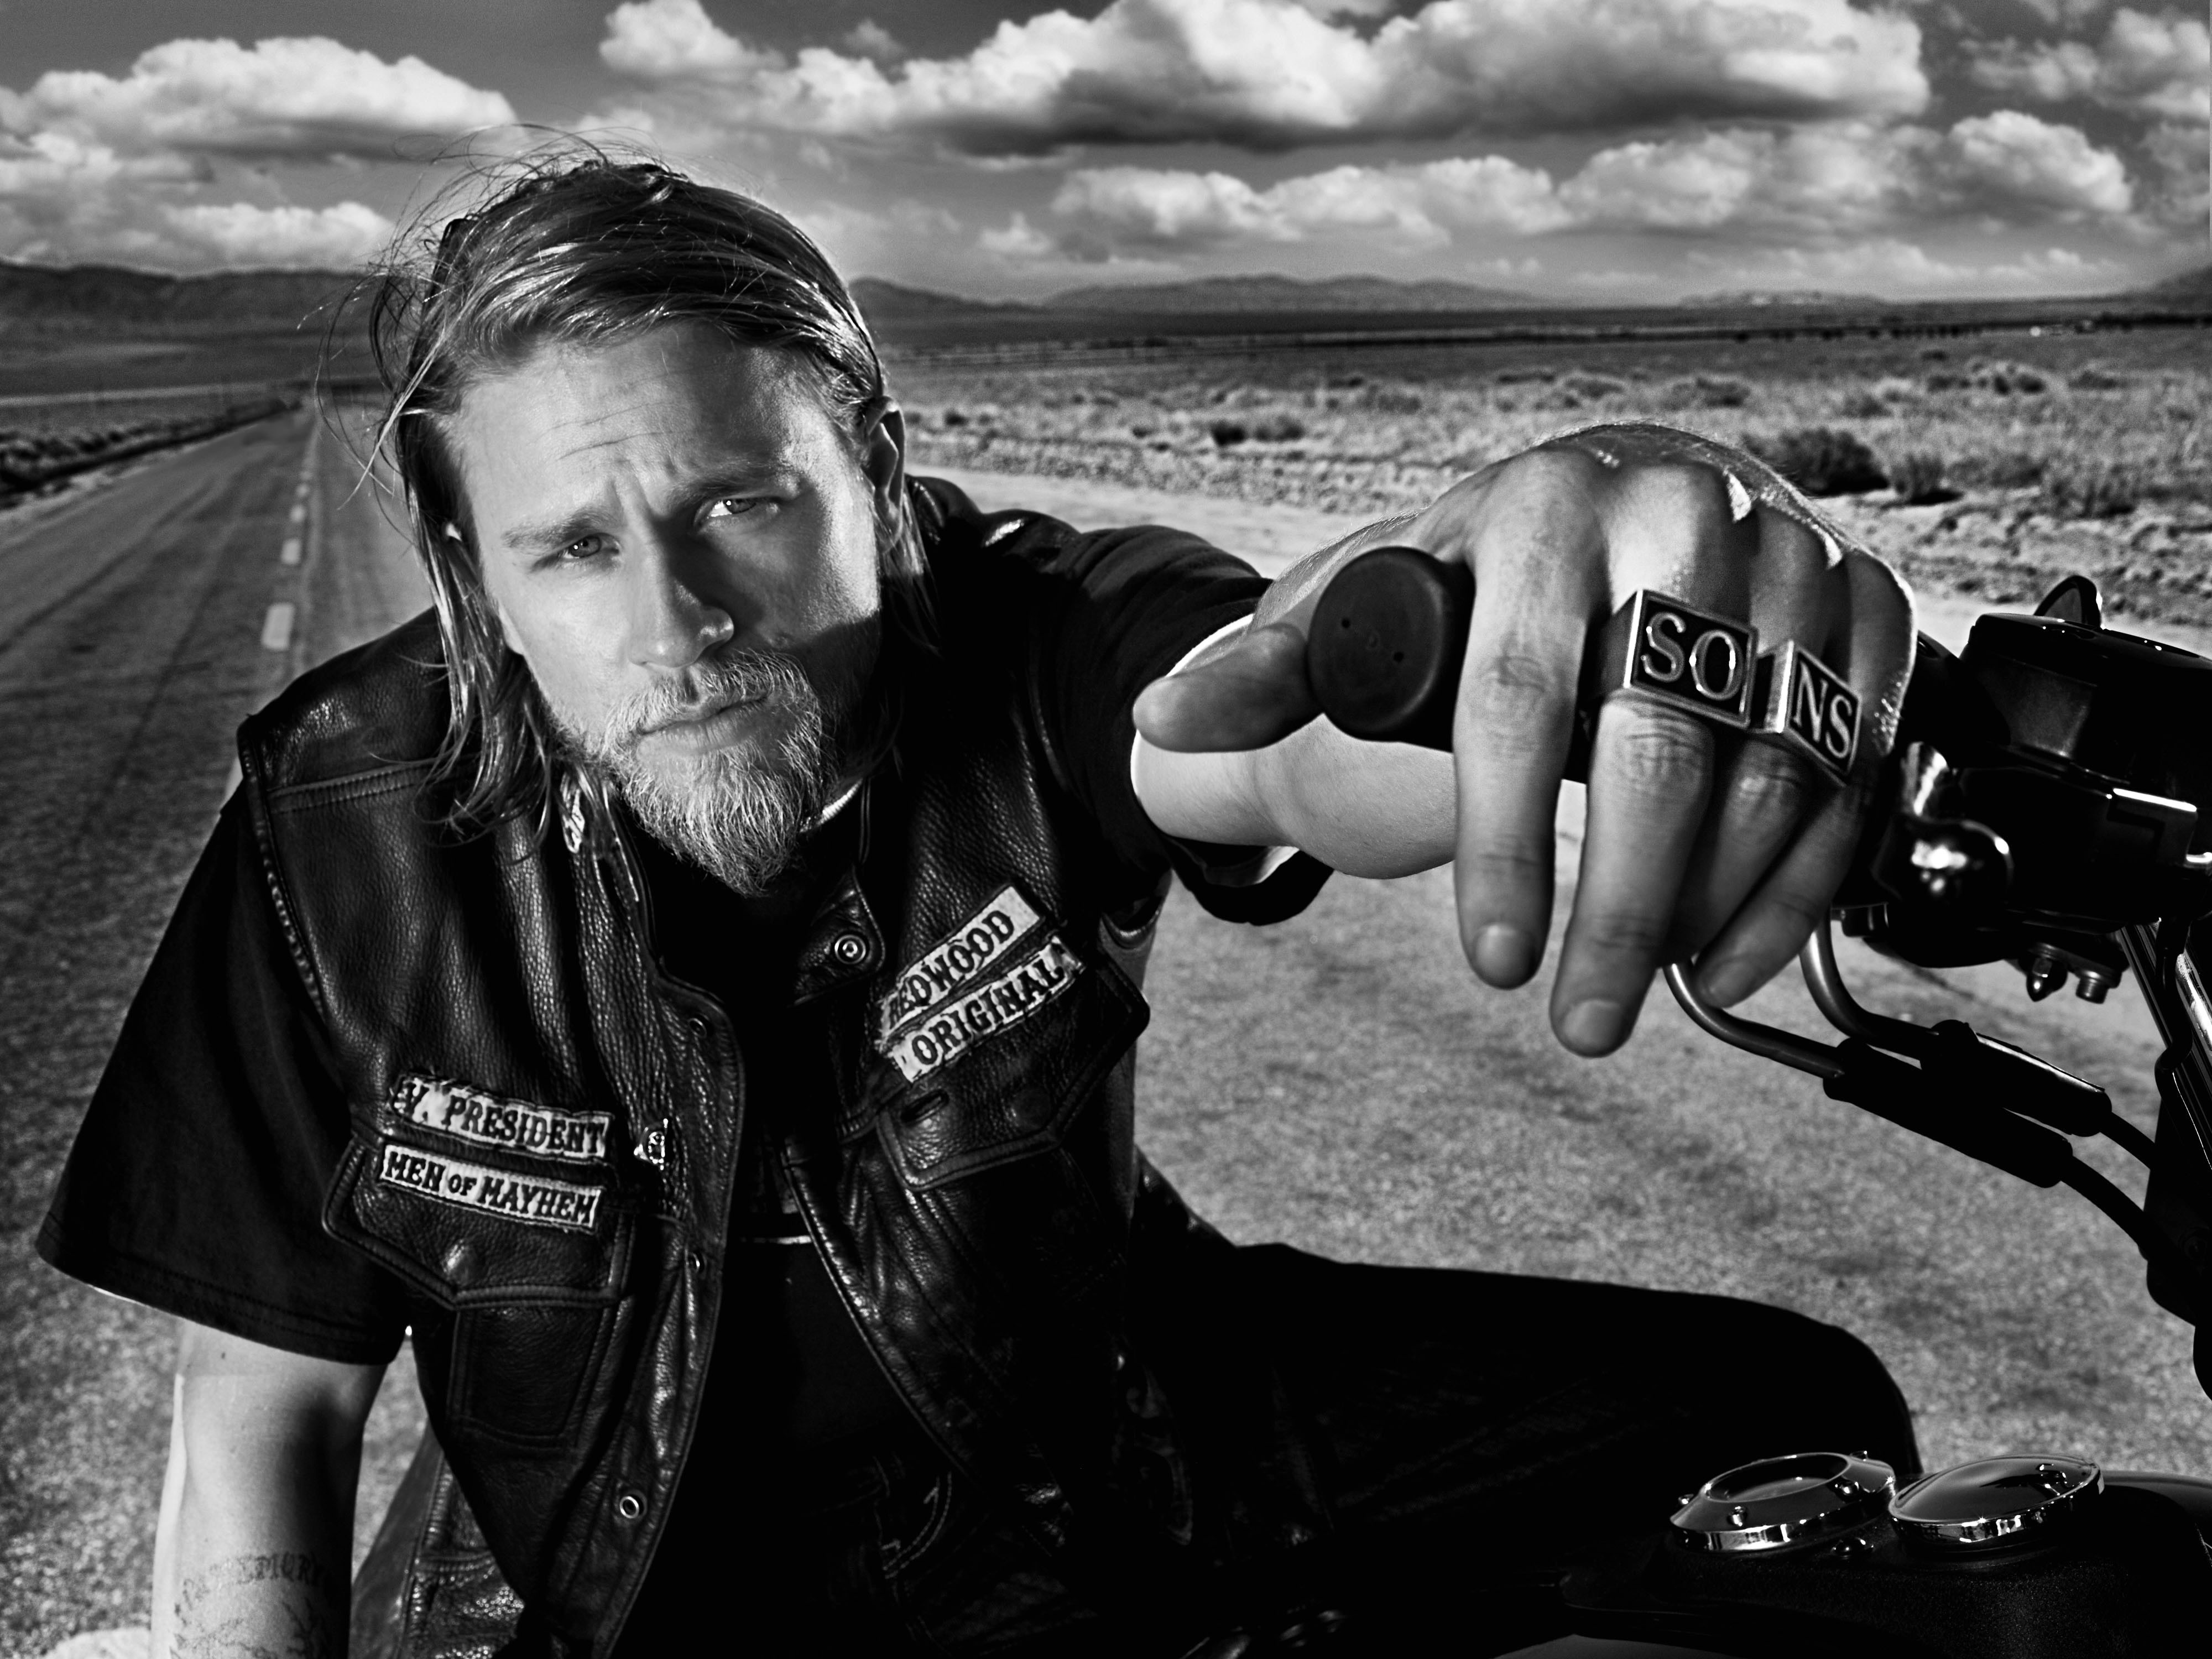 sons of anarchy, tv show Free Background